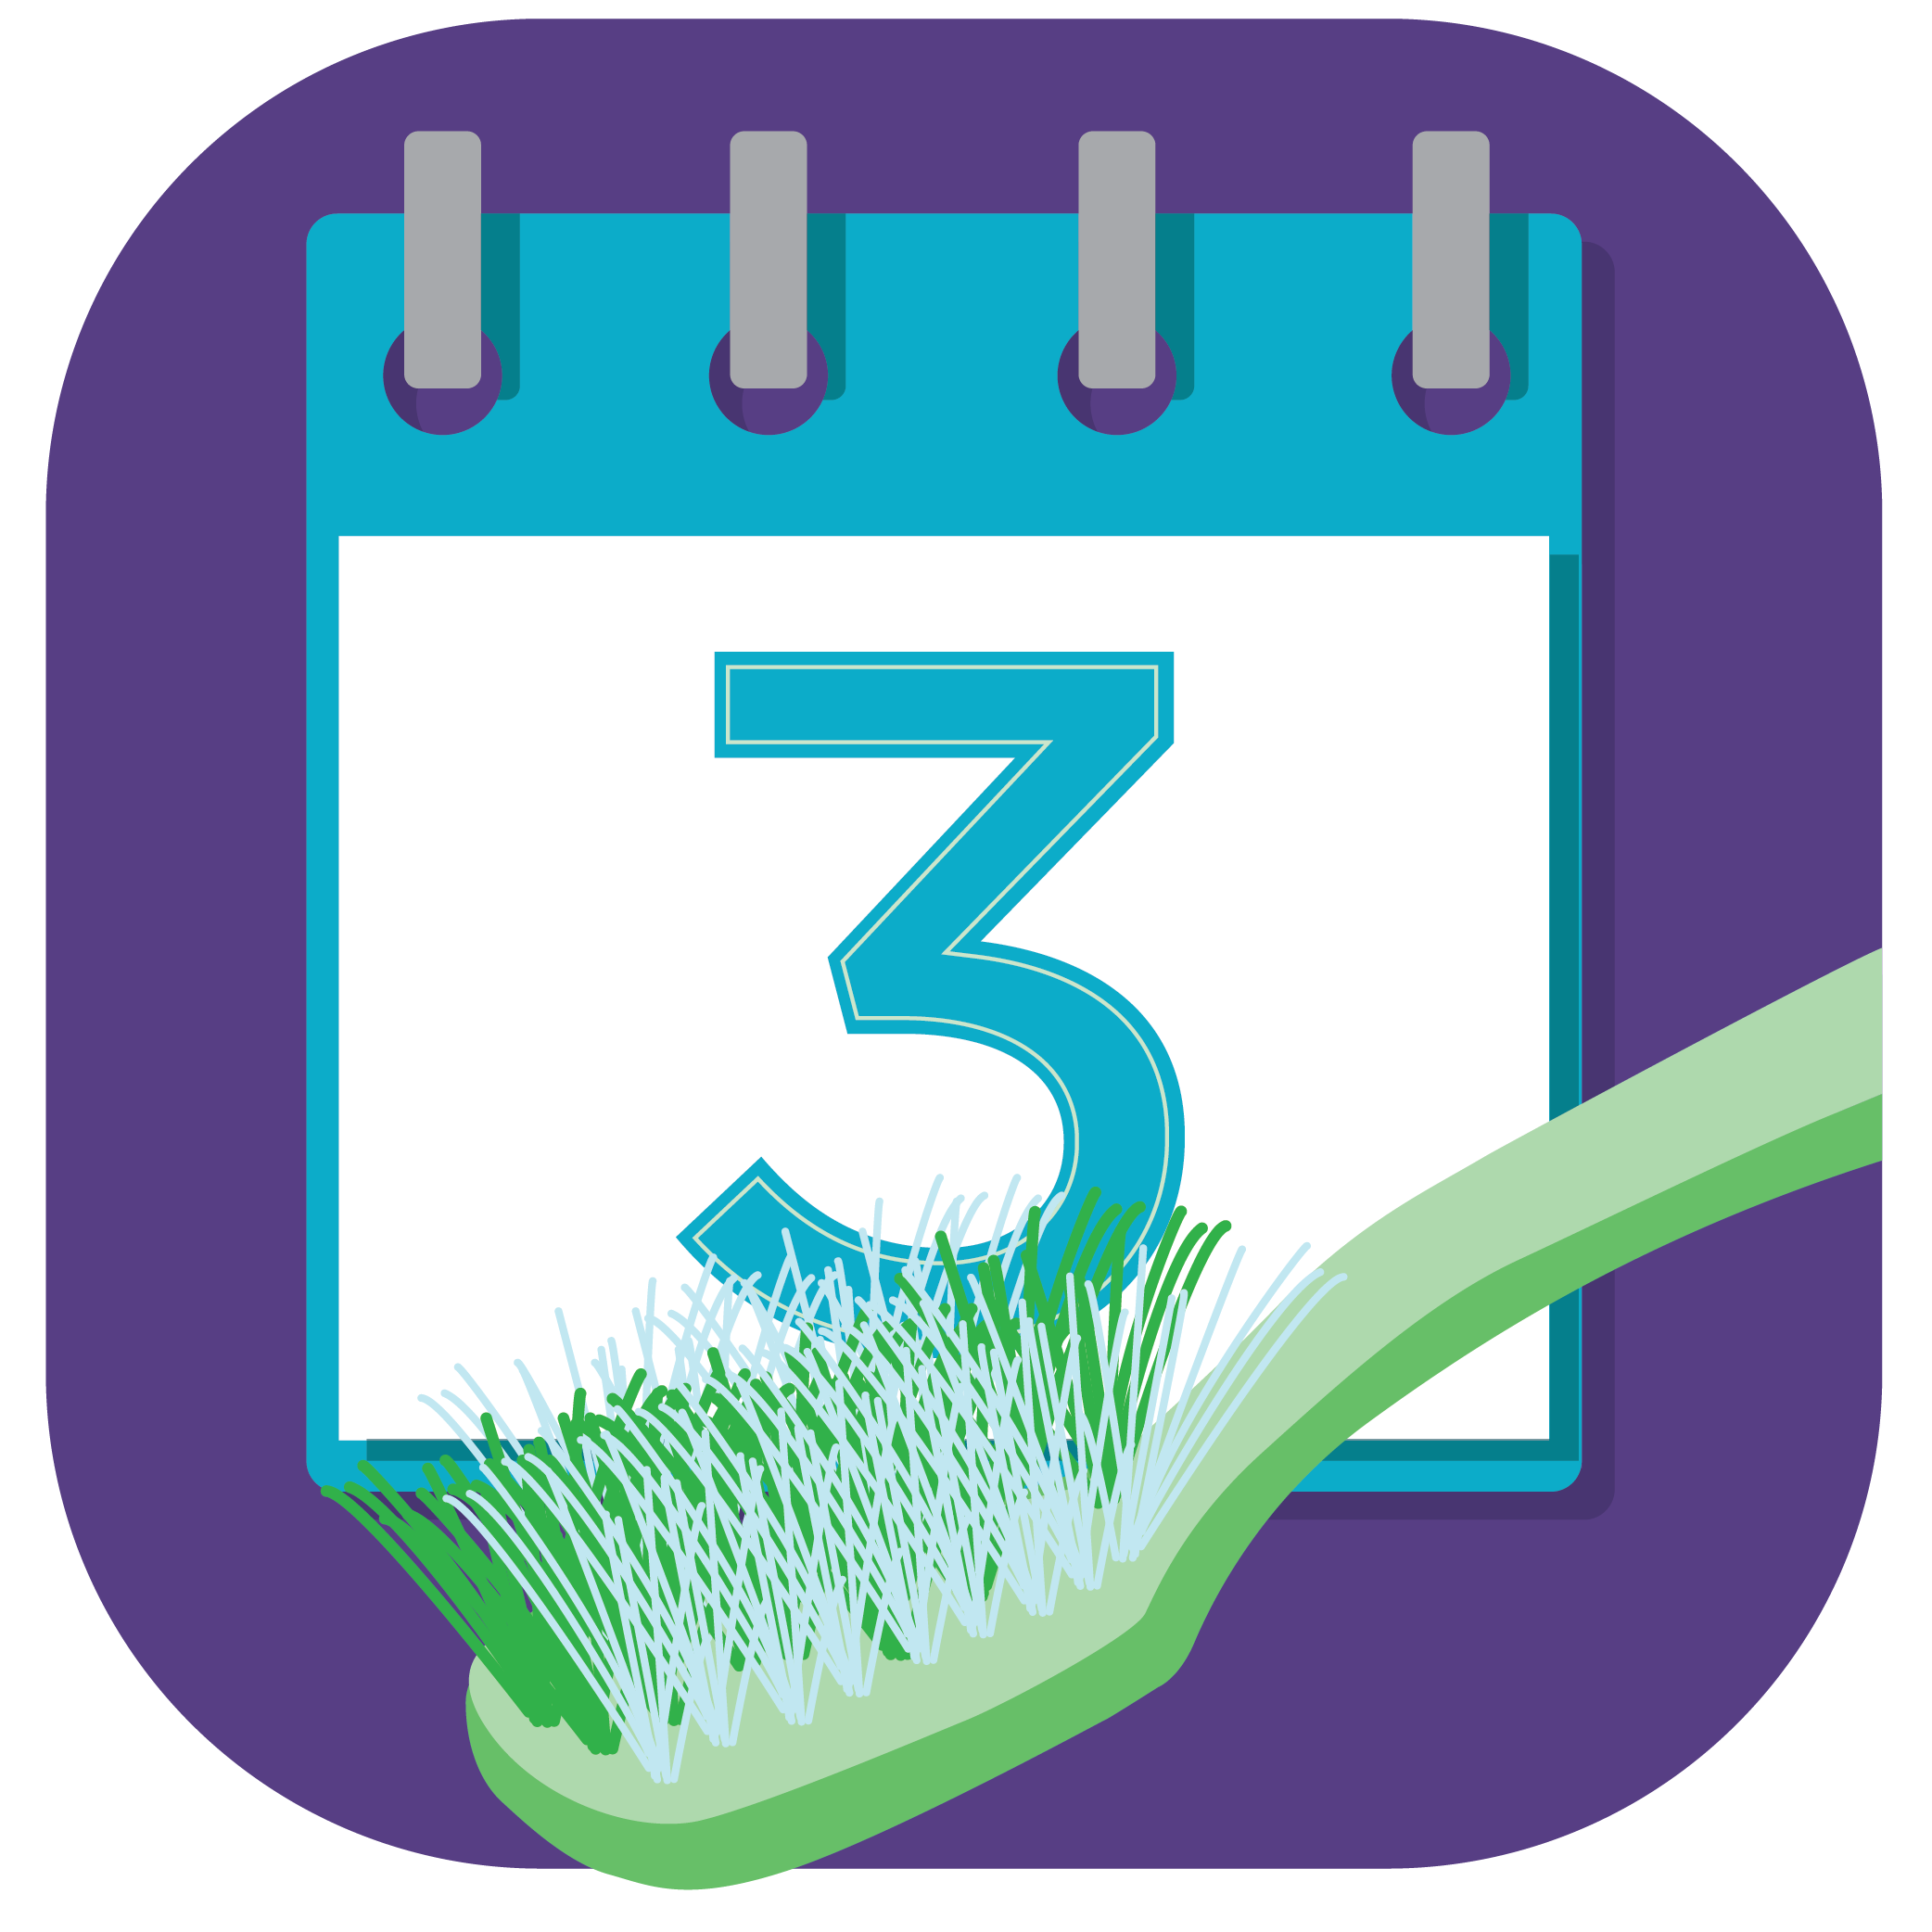 Illustration of a calendar displaying the number 3, indicating you should replace your toothbrush every 3 months. There is also a toothbrush with frayed bristles to show it it should be replaced